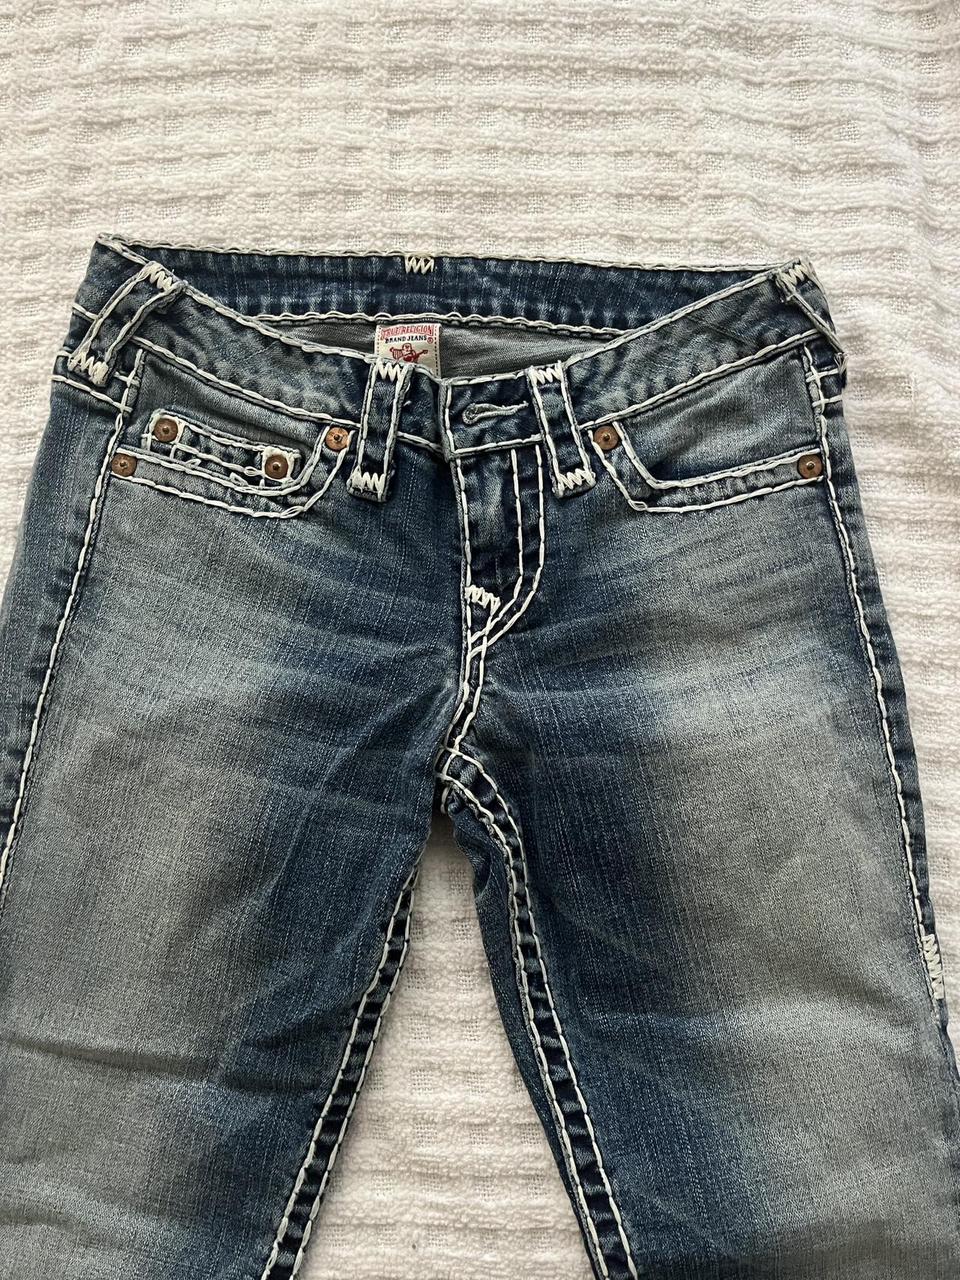 These are true religion jeans that no longer fit me.... - Depop